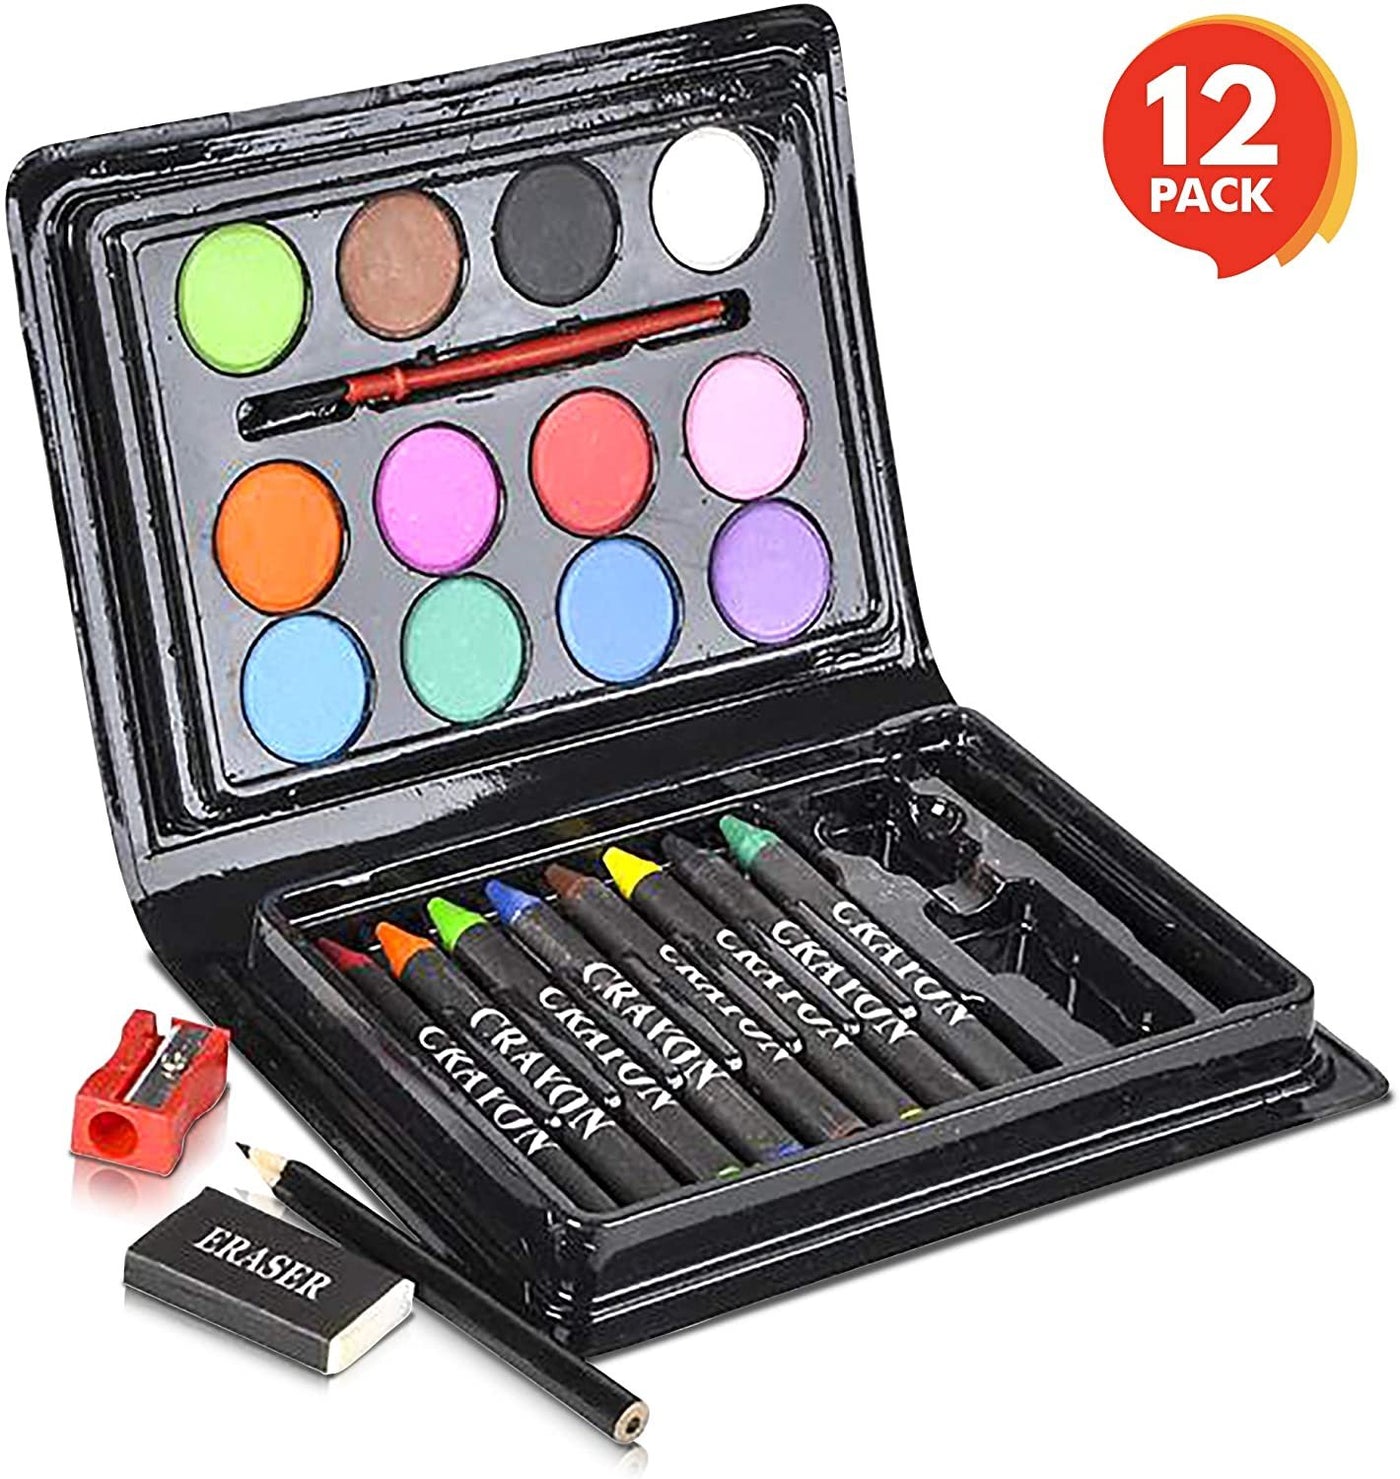 Mini Art Sets for Kids - Pack of 12-23-Piece Kits with Watercolors